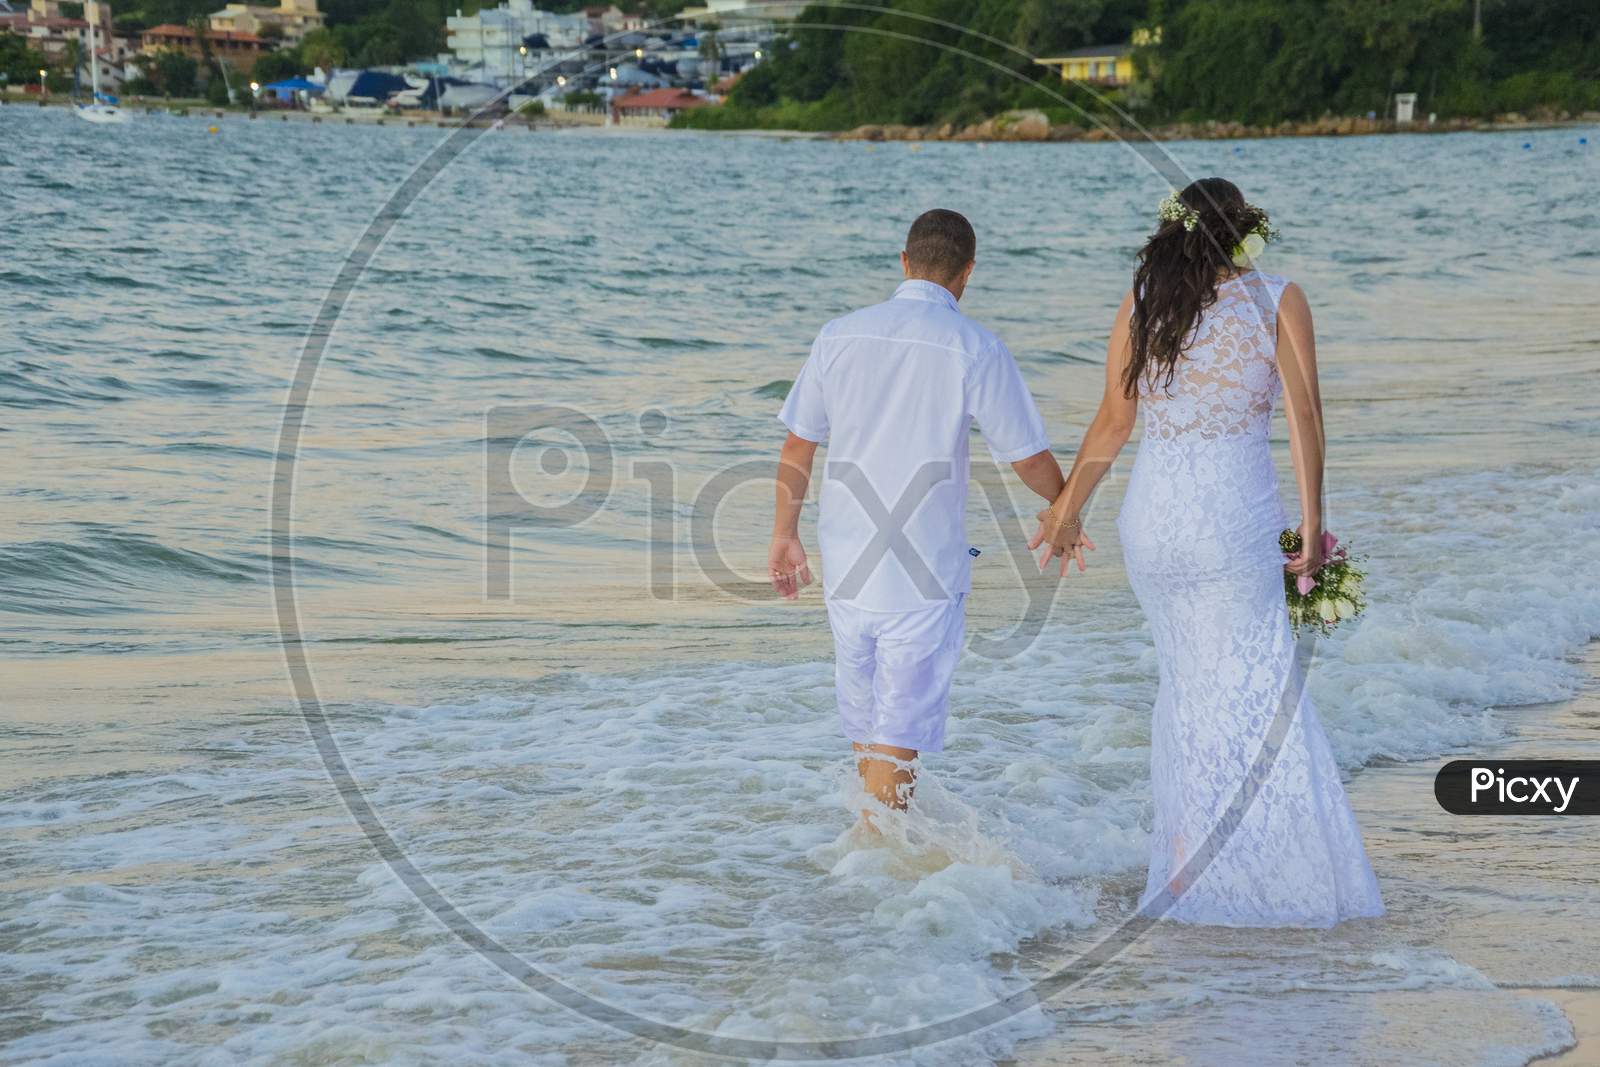 Beach Wedding With Bride And Groom Dressed In White.